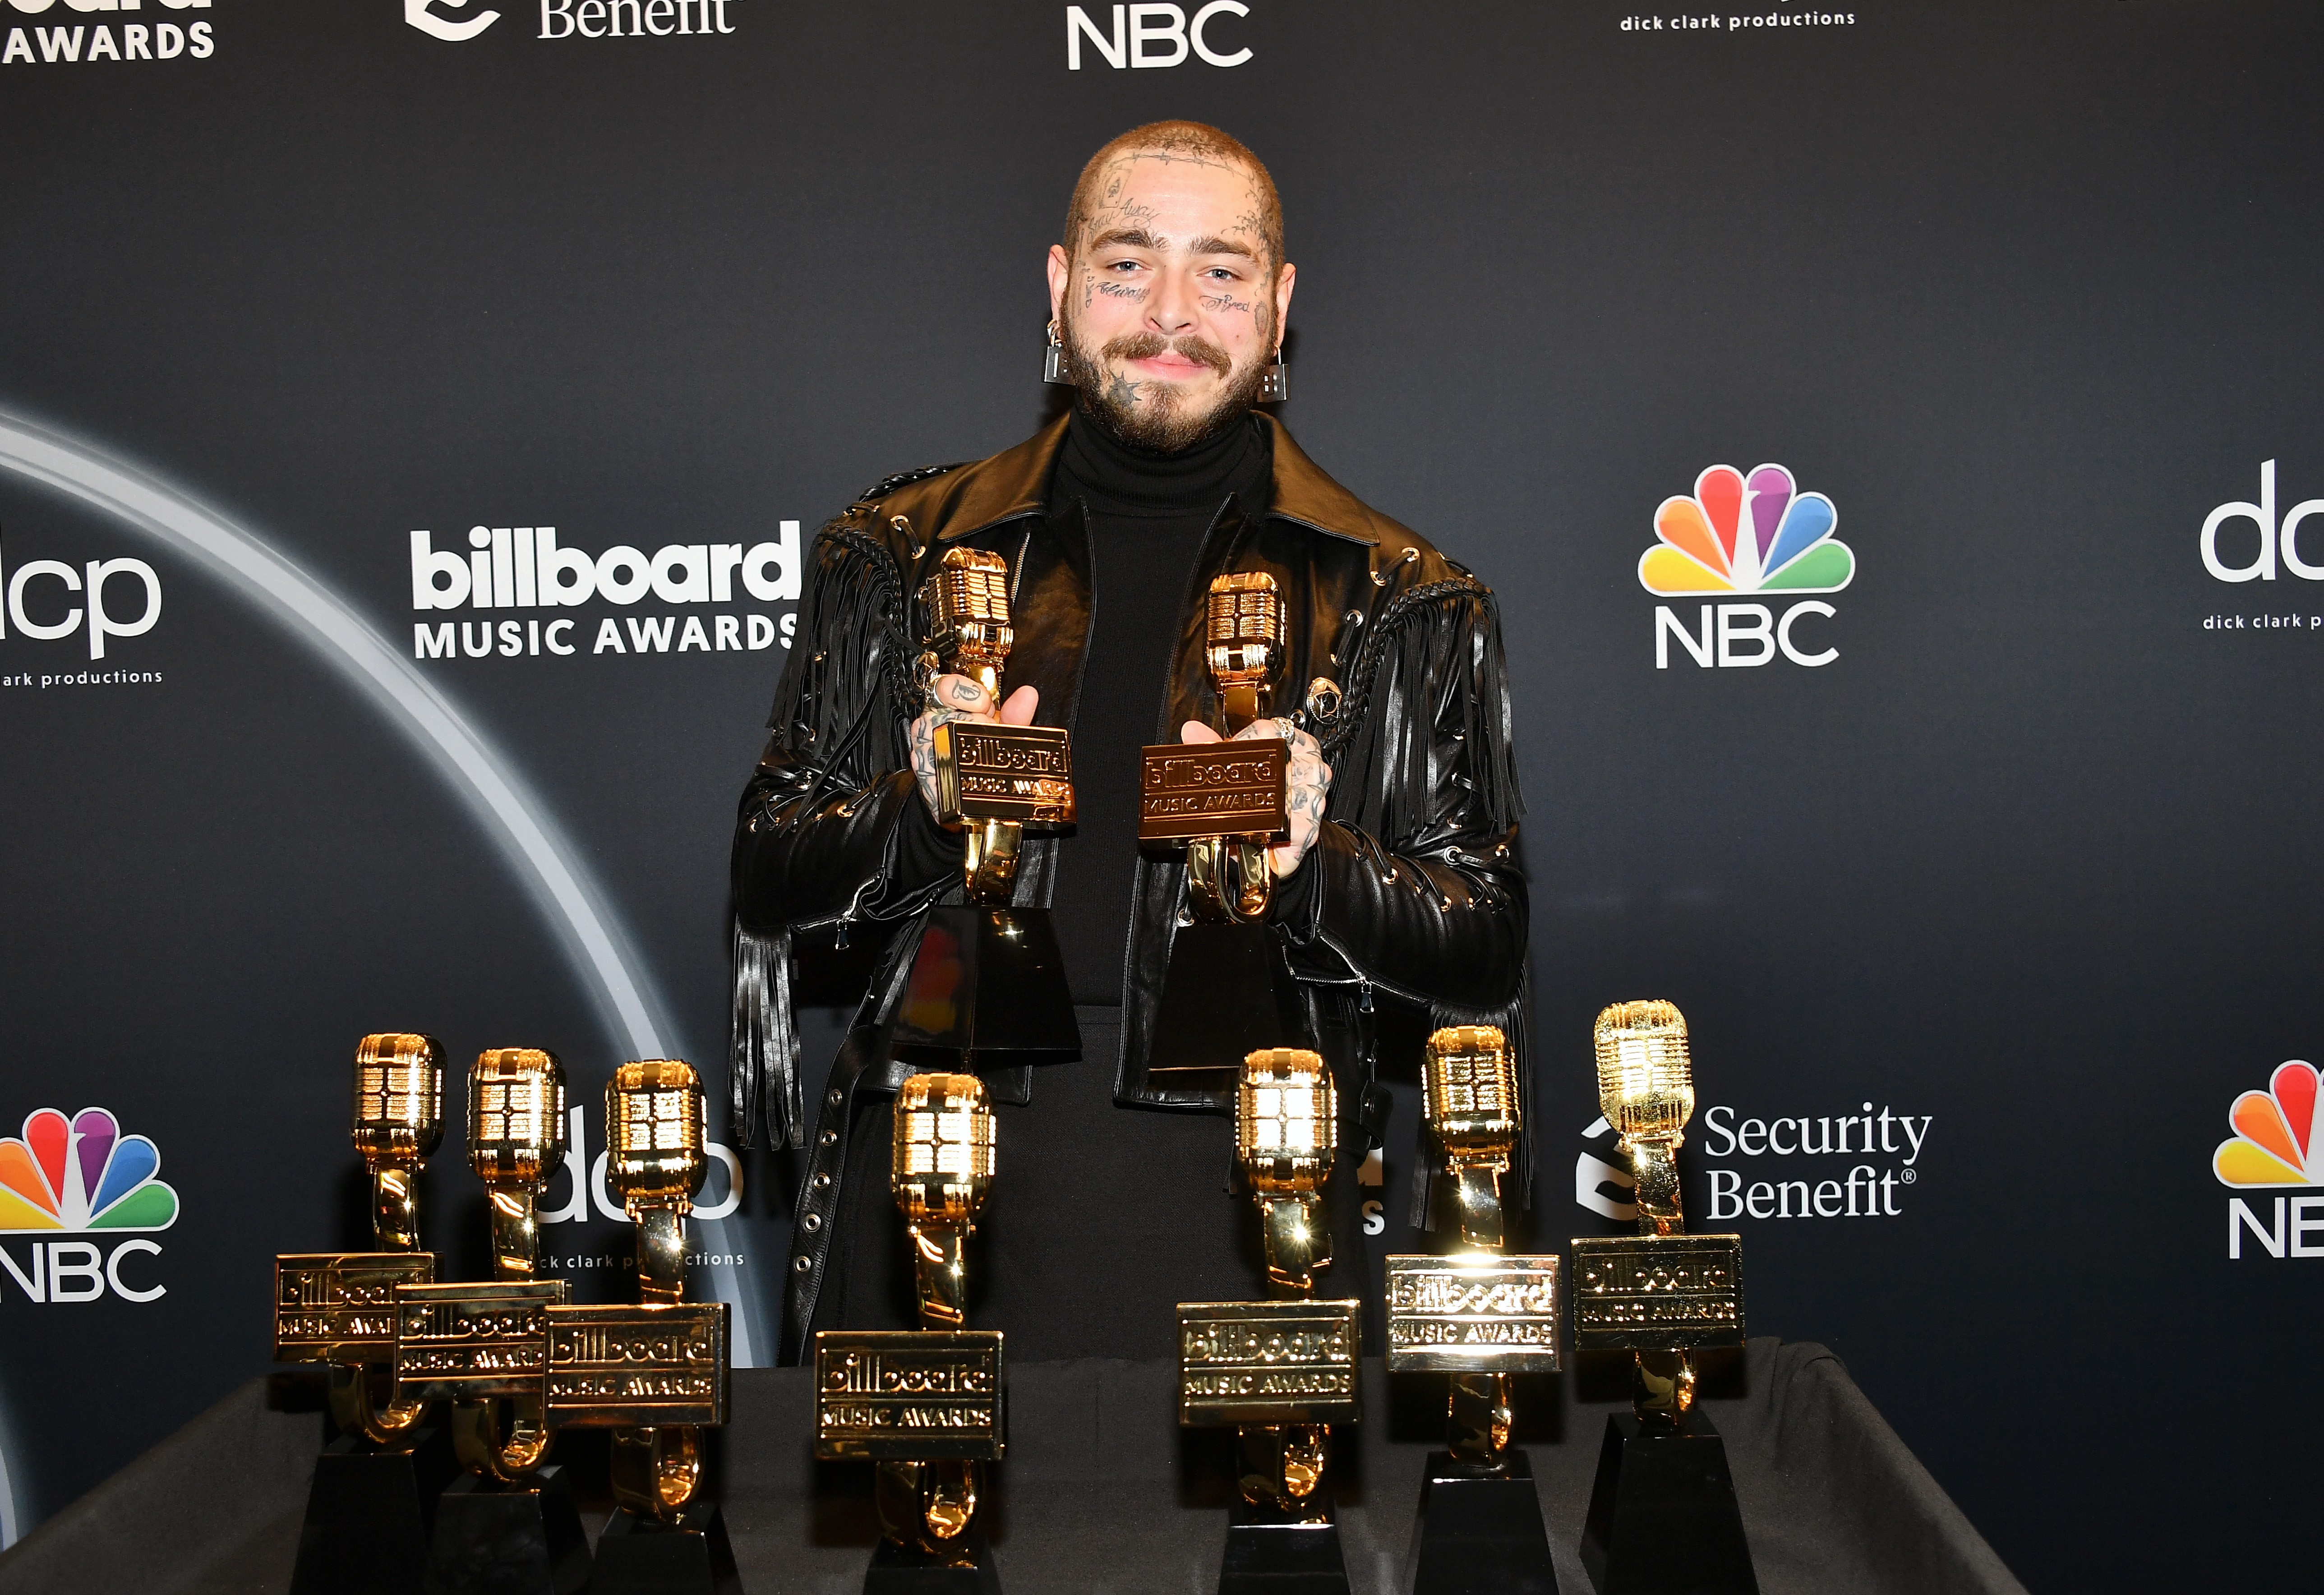 HOLLYWOOD, CALIFORNIA - OCTOBER 14: In this image released on October 14, Post Malone poses backstage at the 2020 Billboard Music Awards, broadcast on October 14, 2020 at the Dolby Theatre in Los Angeles, CA.  (Photo by Amy Sussman/BBMA2020/Getty Images f (Foto: Getty Images for dcp)